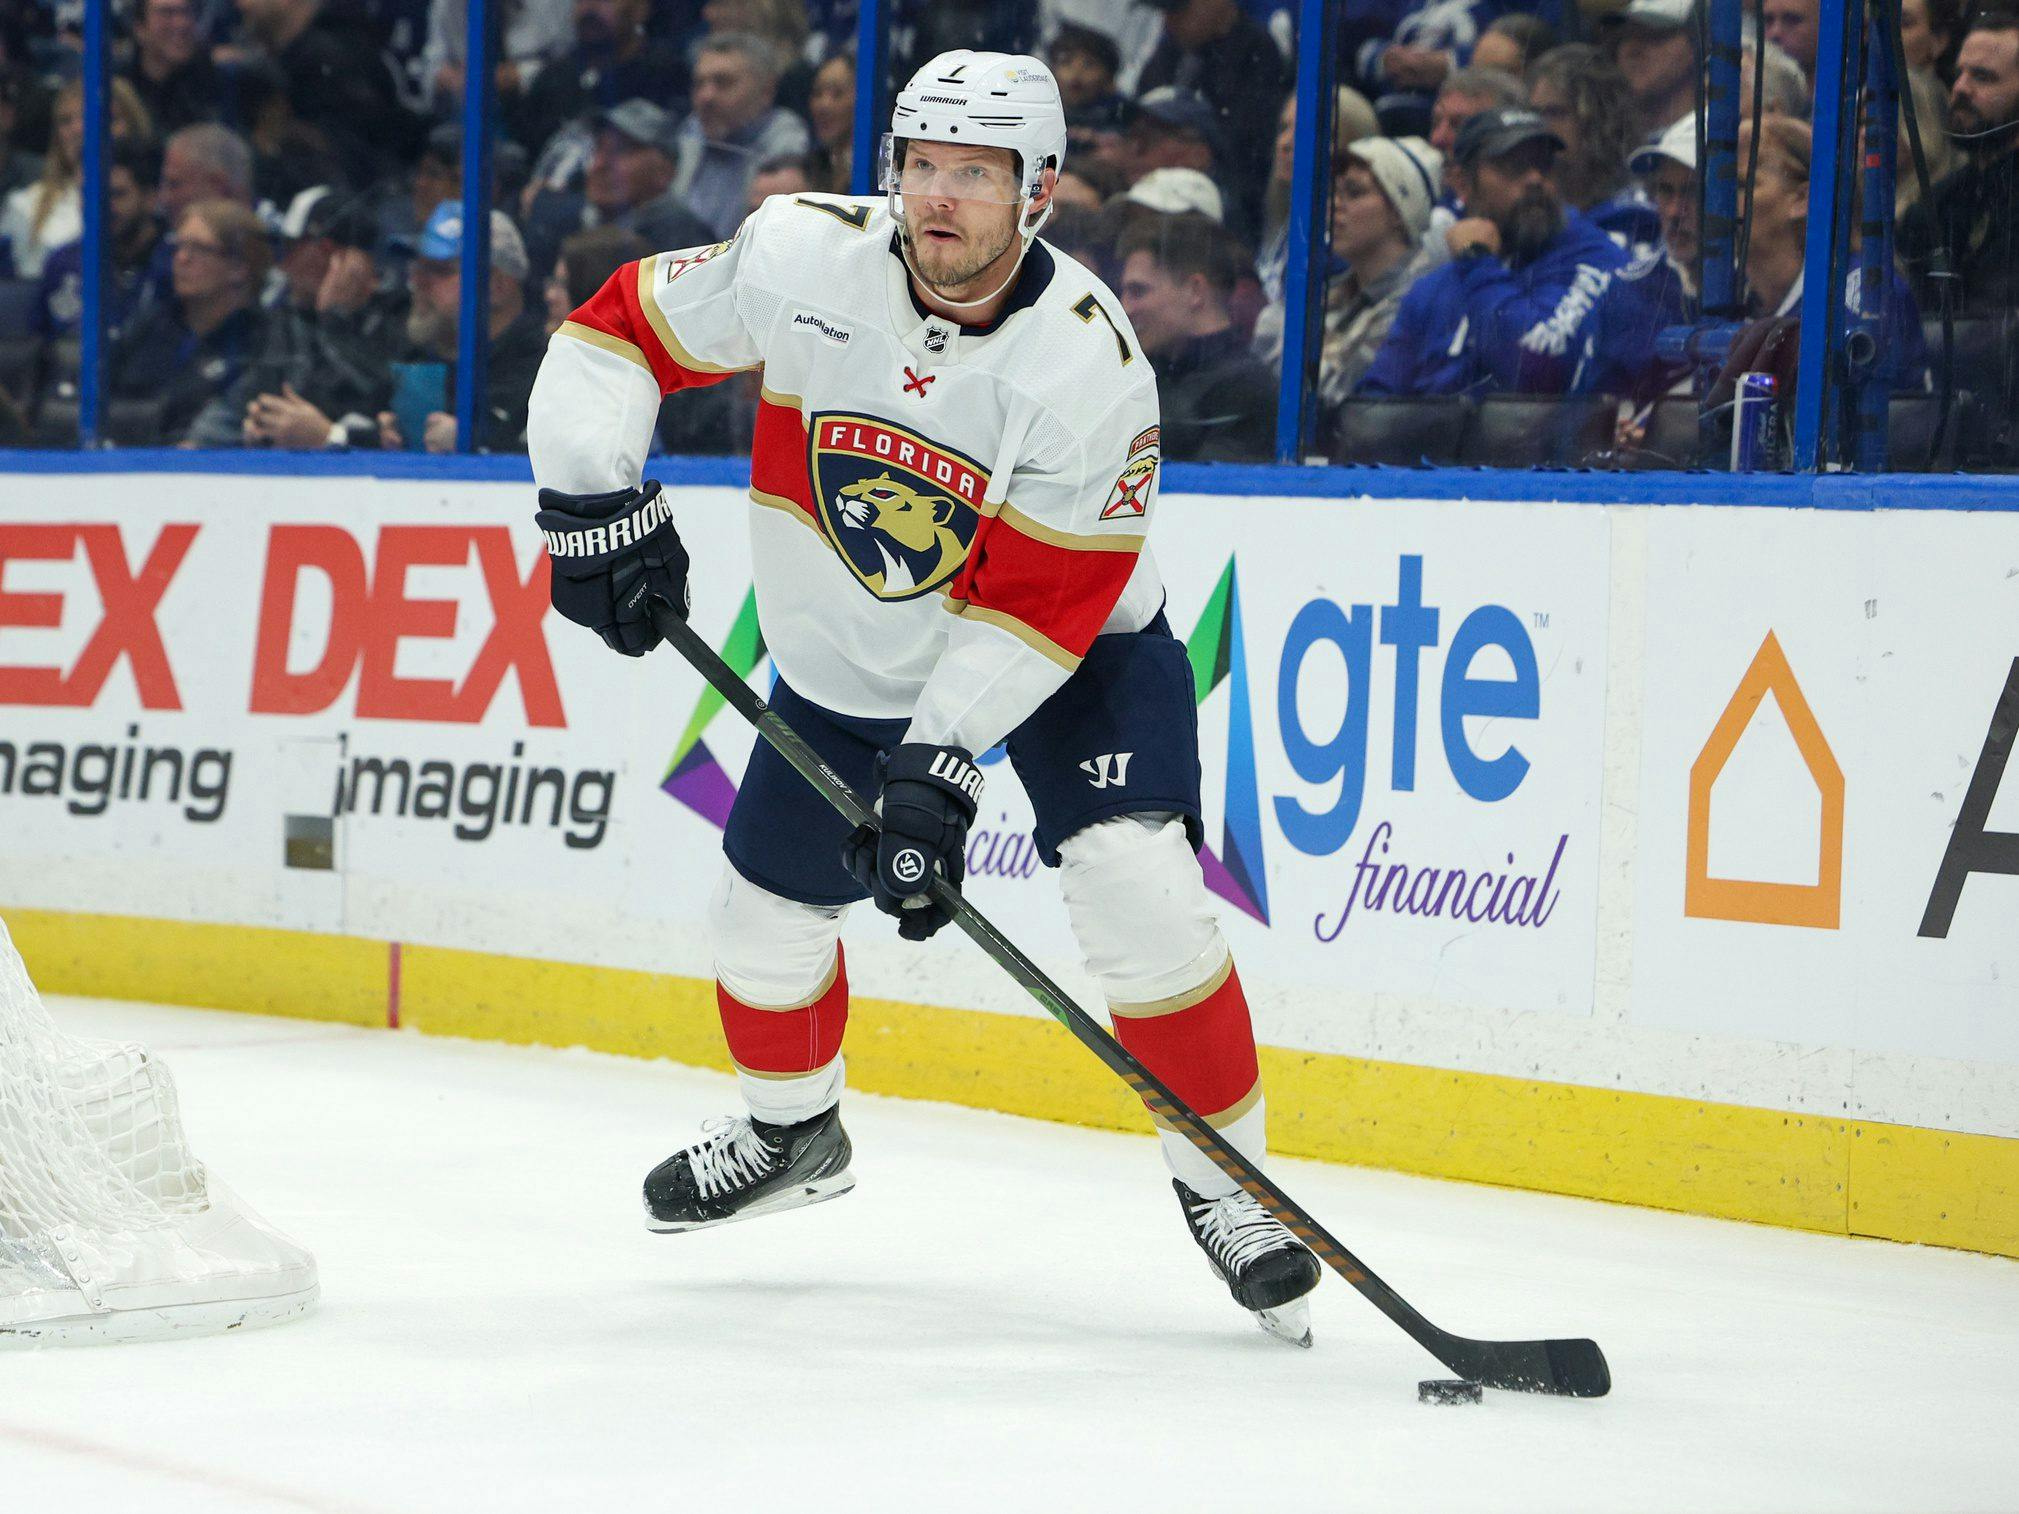 Panthers defenseman Dmitry Kulikov to have hearing for illegal check to the head